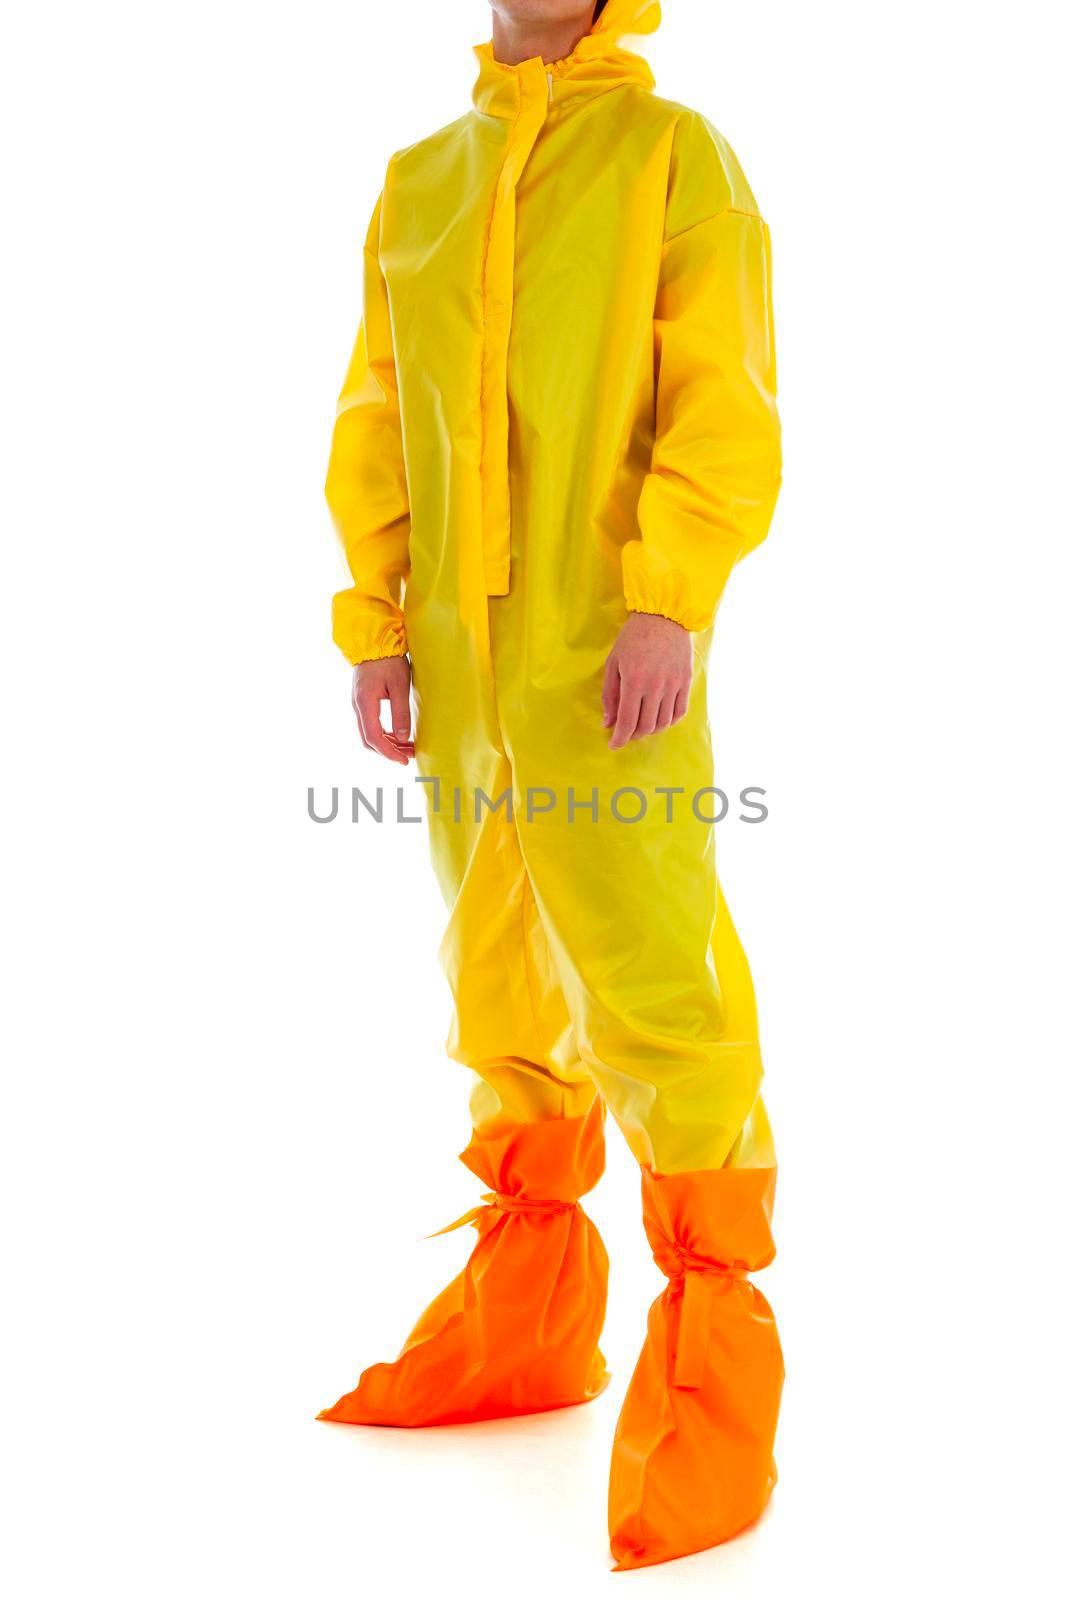 Man wearing yellow protective suit isolated on white background by Nobilior